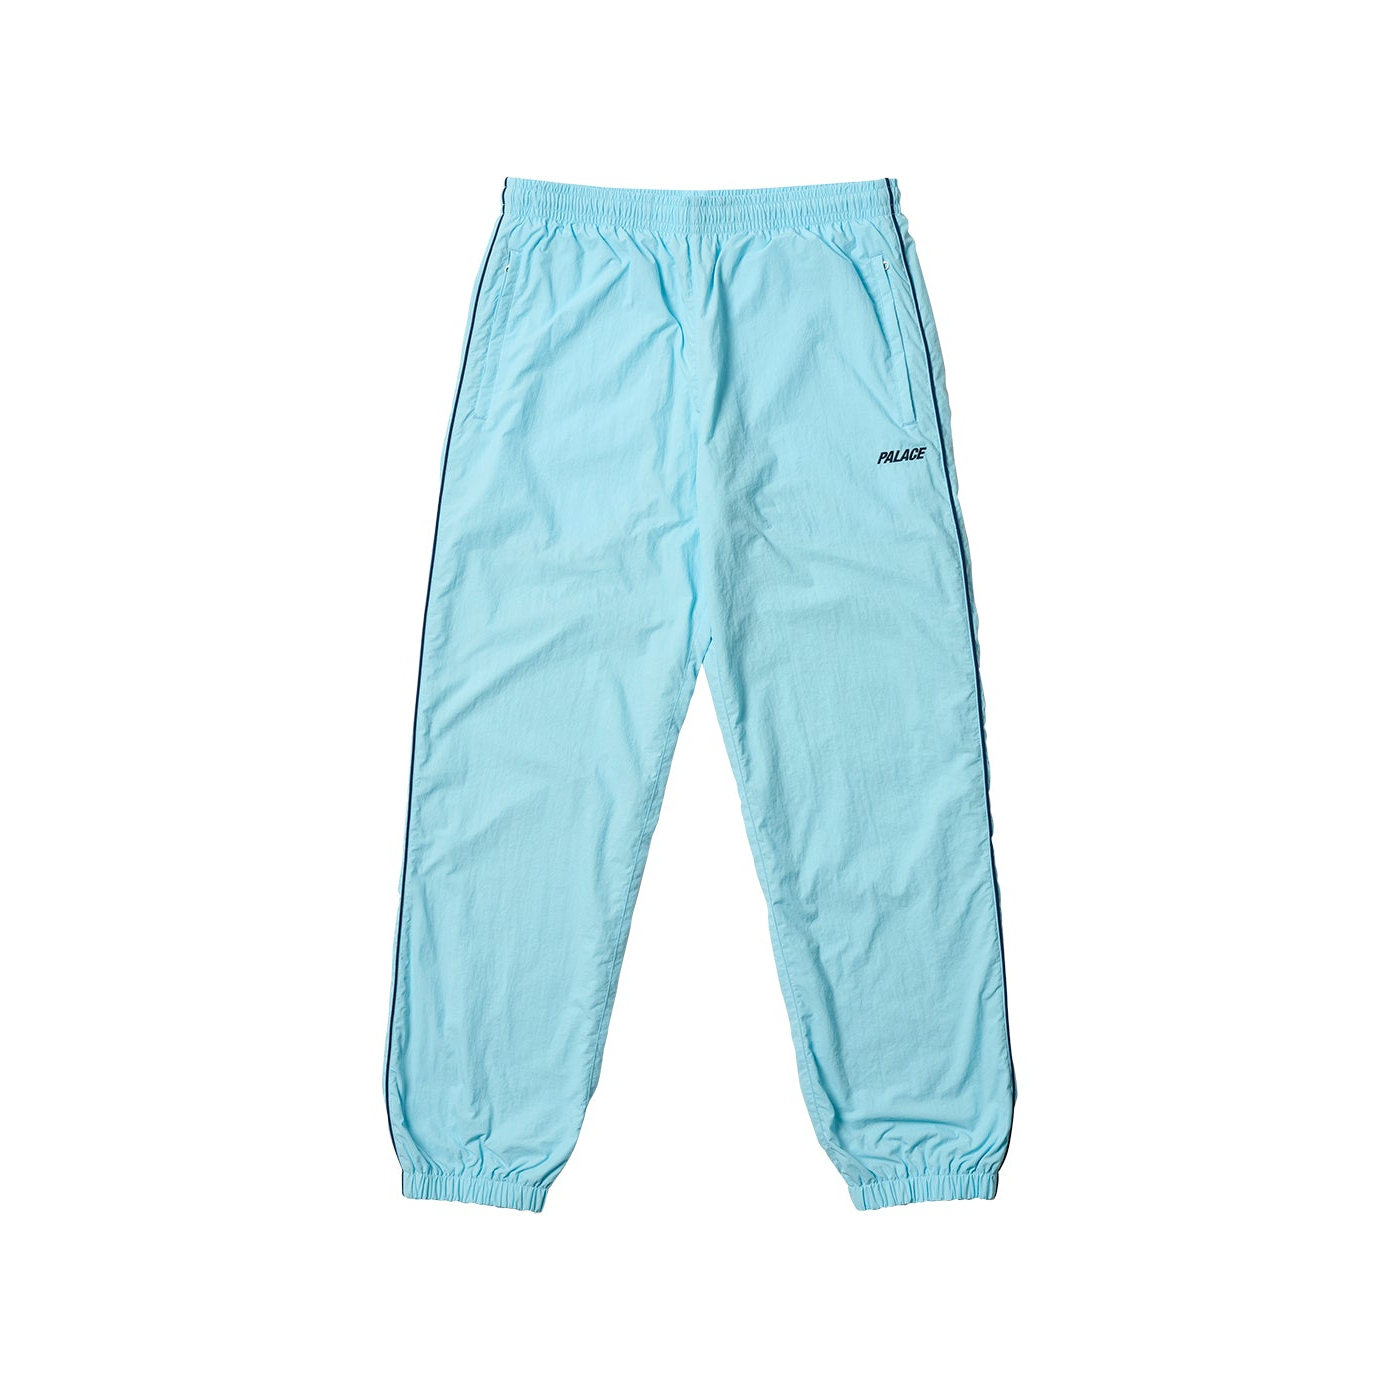 Thumbnail PIPED SHELL JOGGER SKY one color